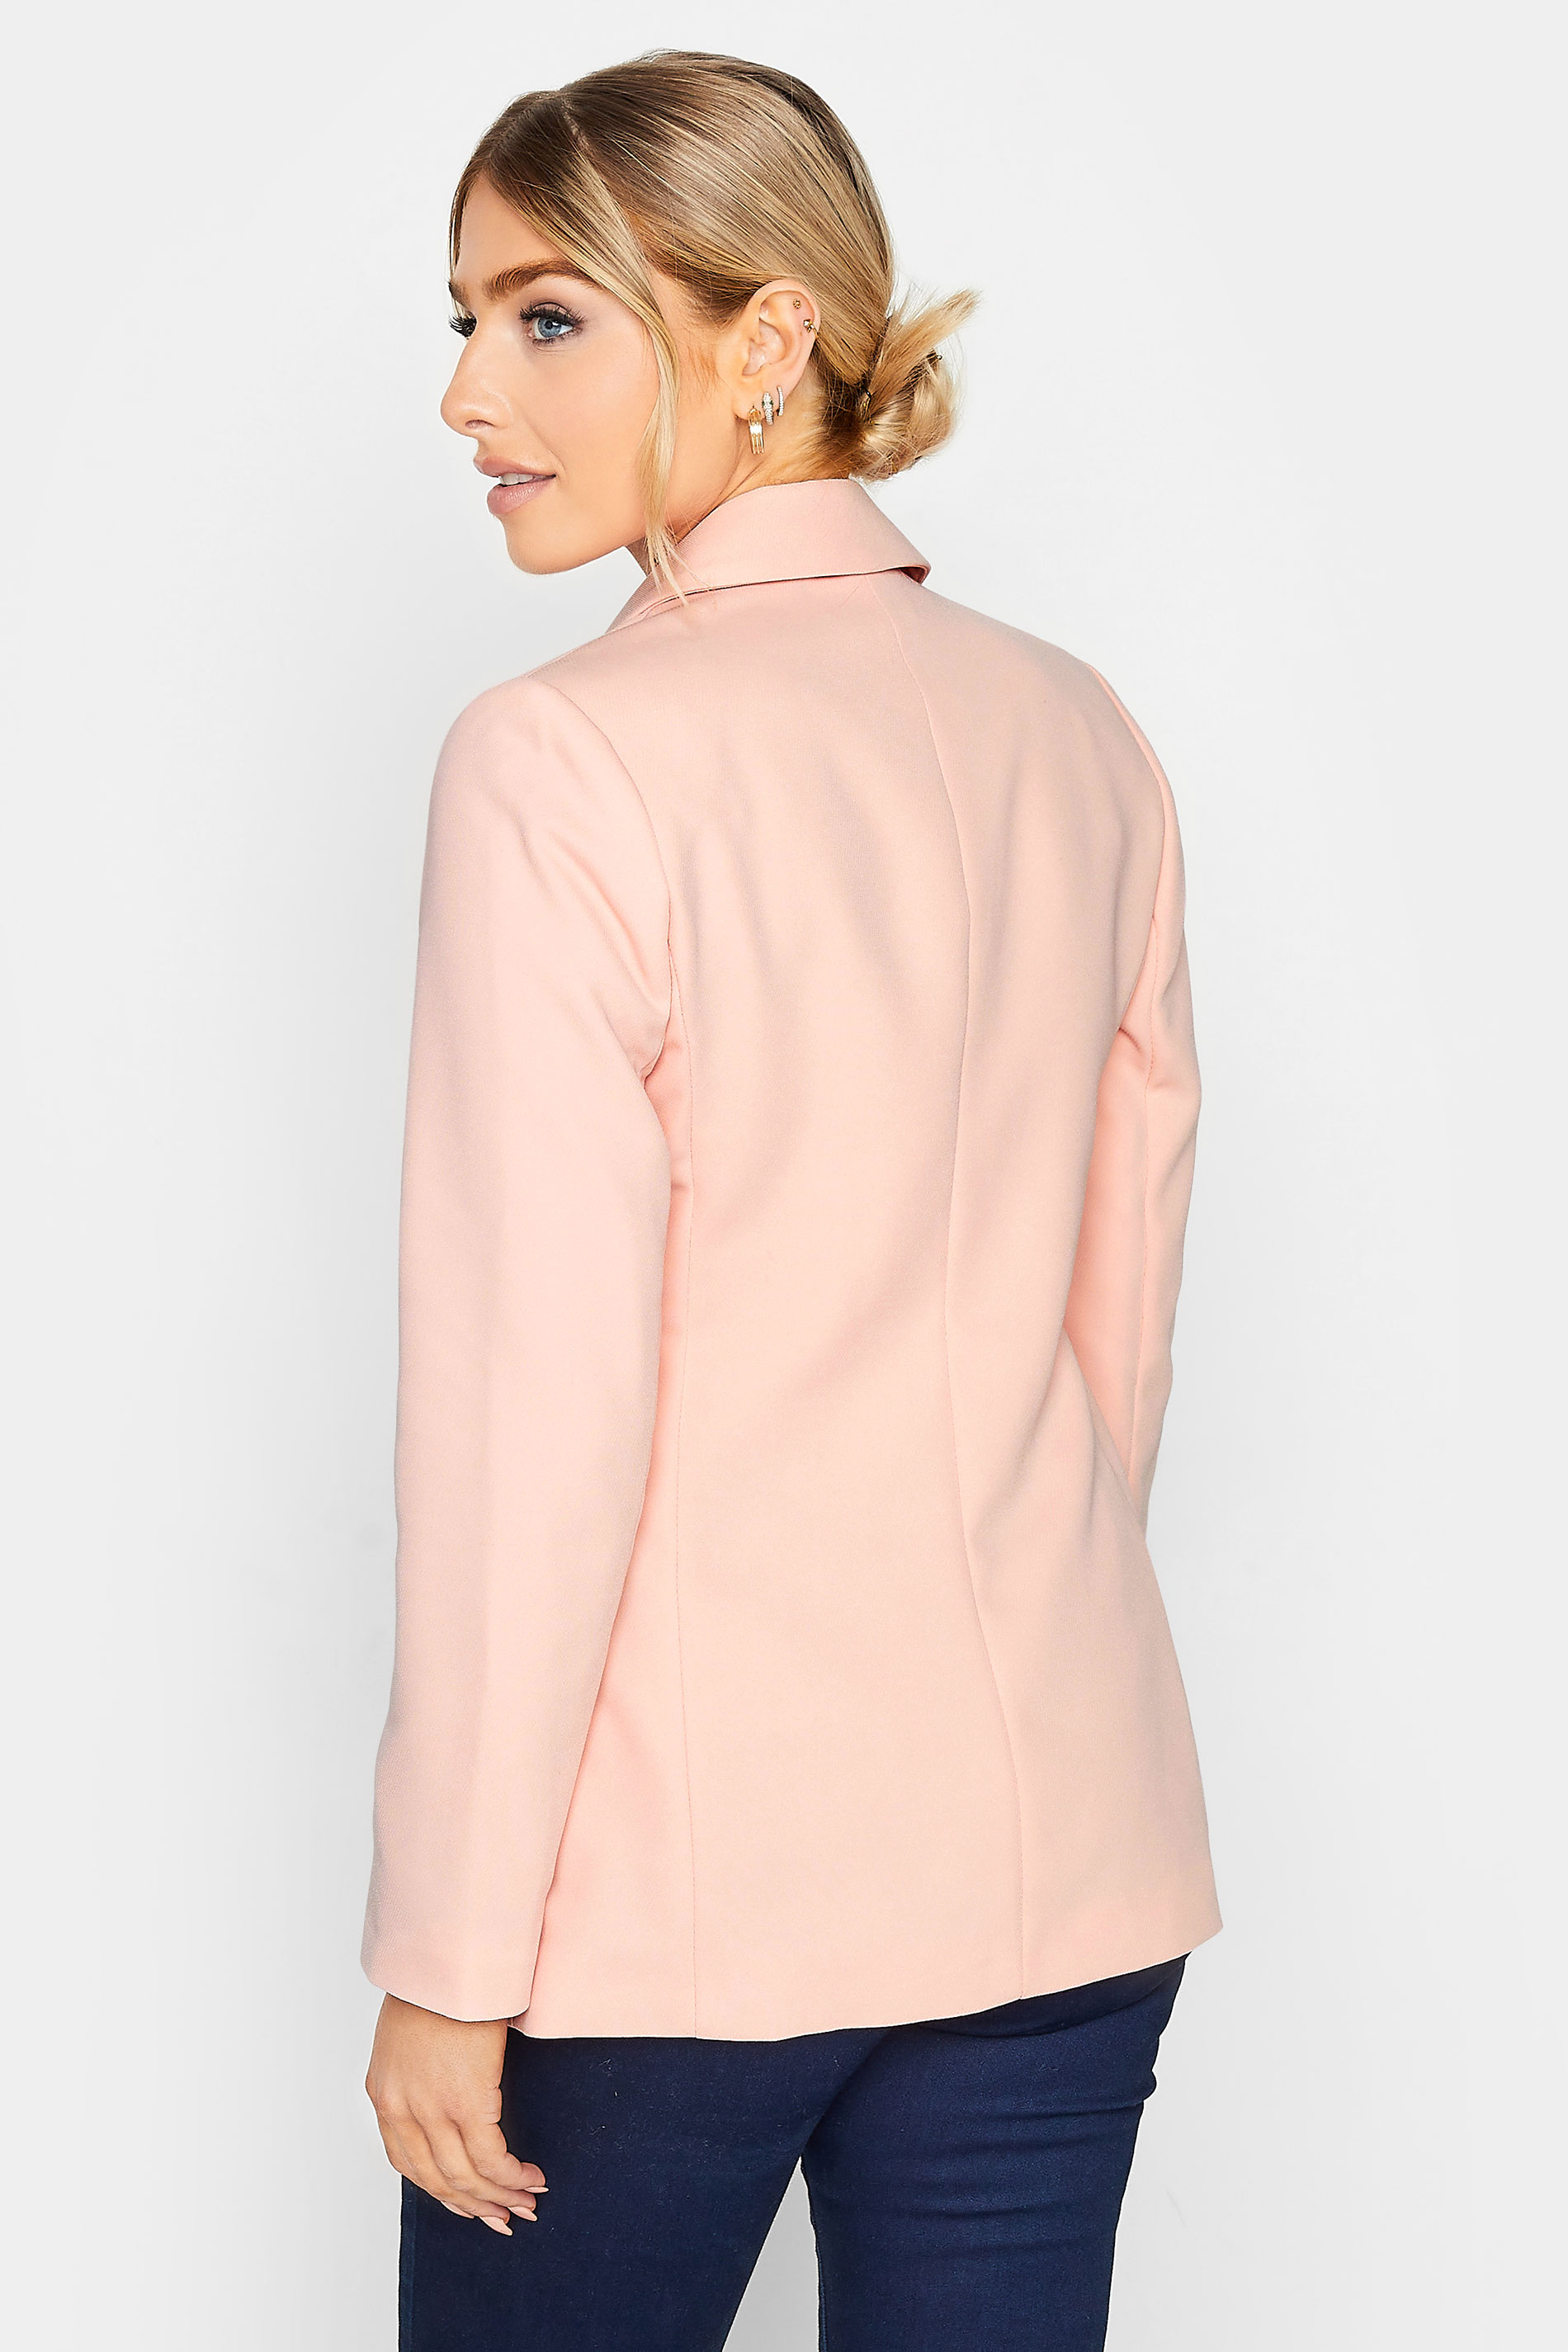 M&Co Pink Tailored Button Blazer | M&Co 3